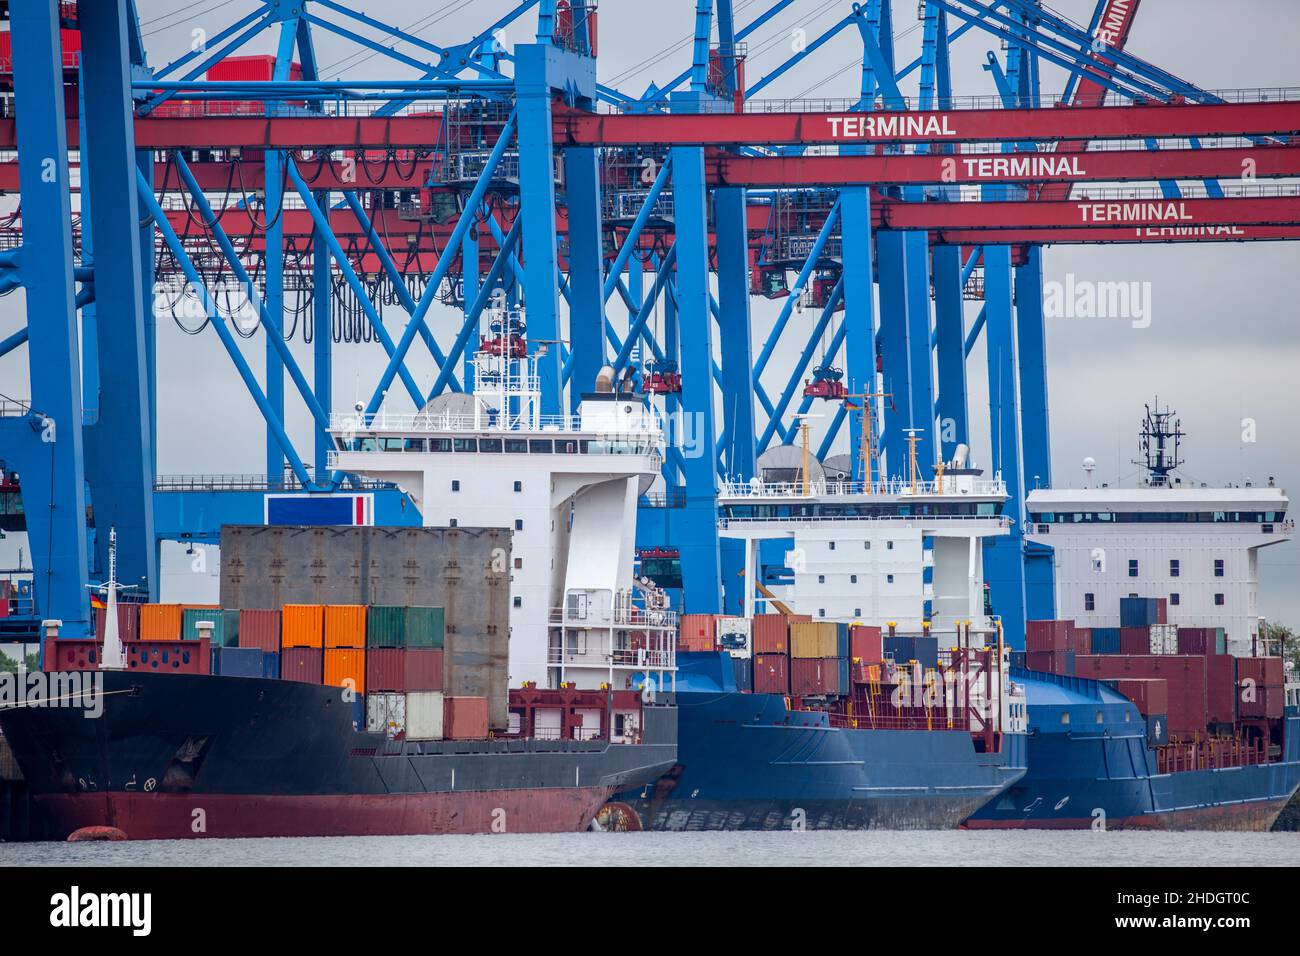 container ship, container port, import, export, container ships, container ports, imports, exports Stock Photo